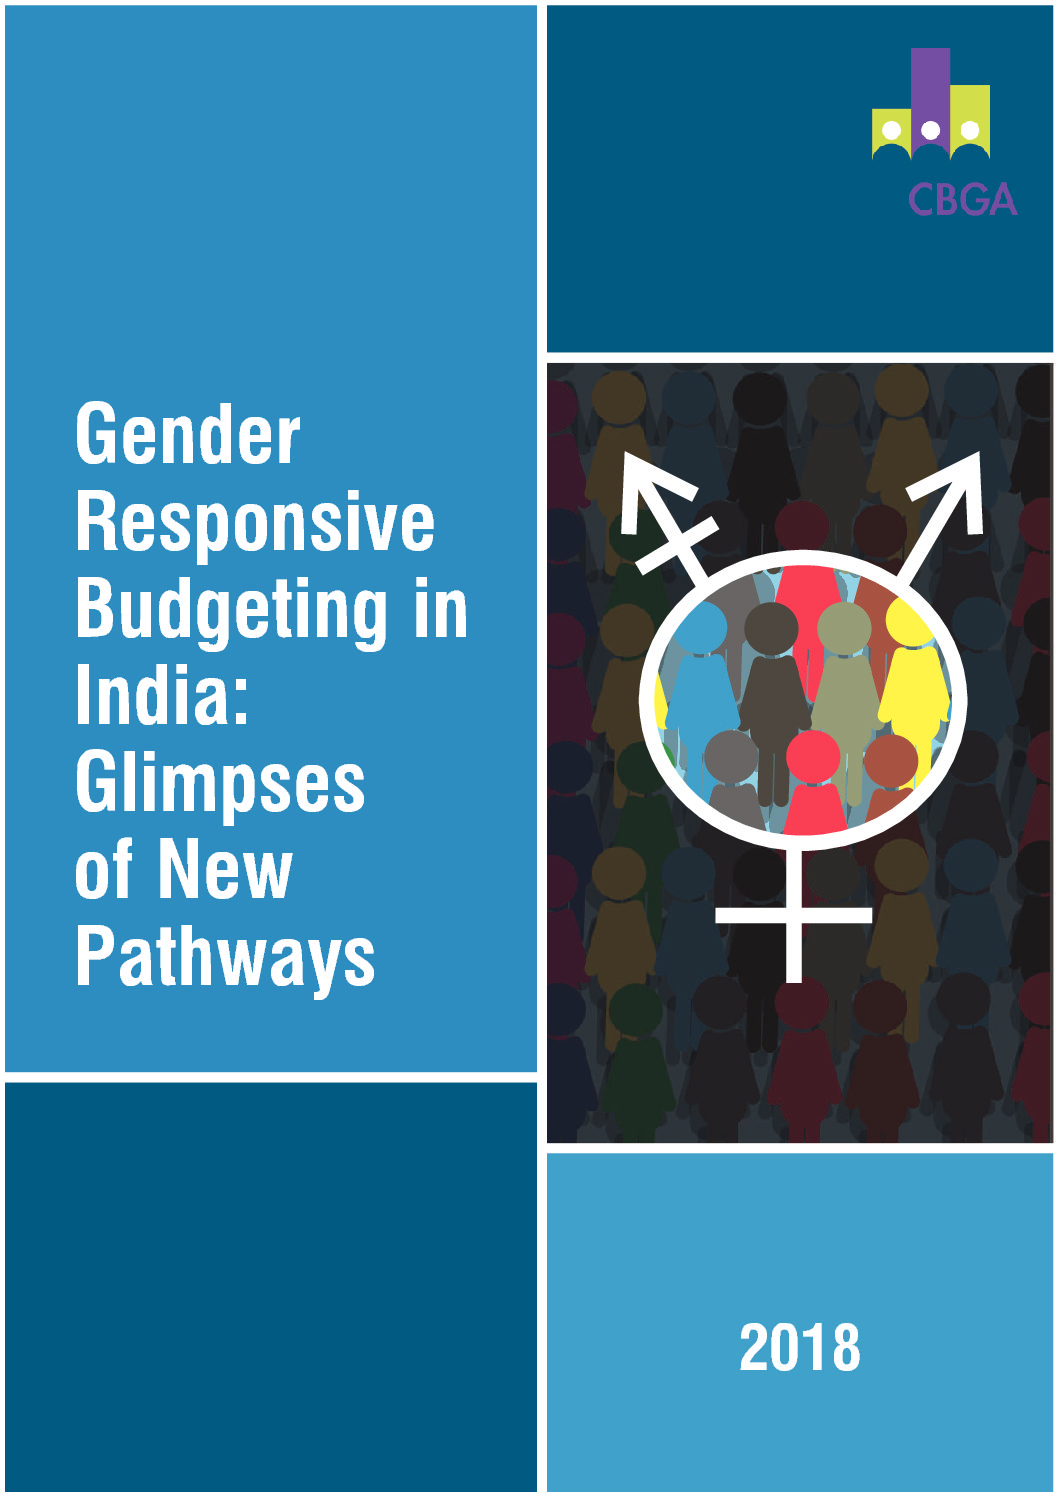 research paper on gender budgeting in india